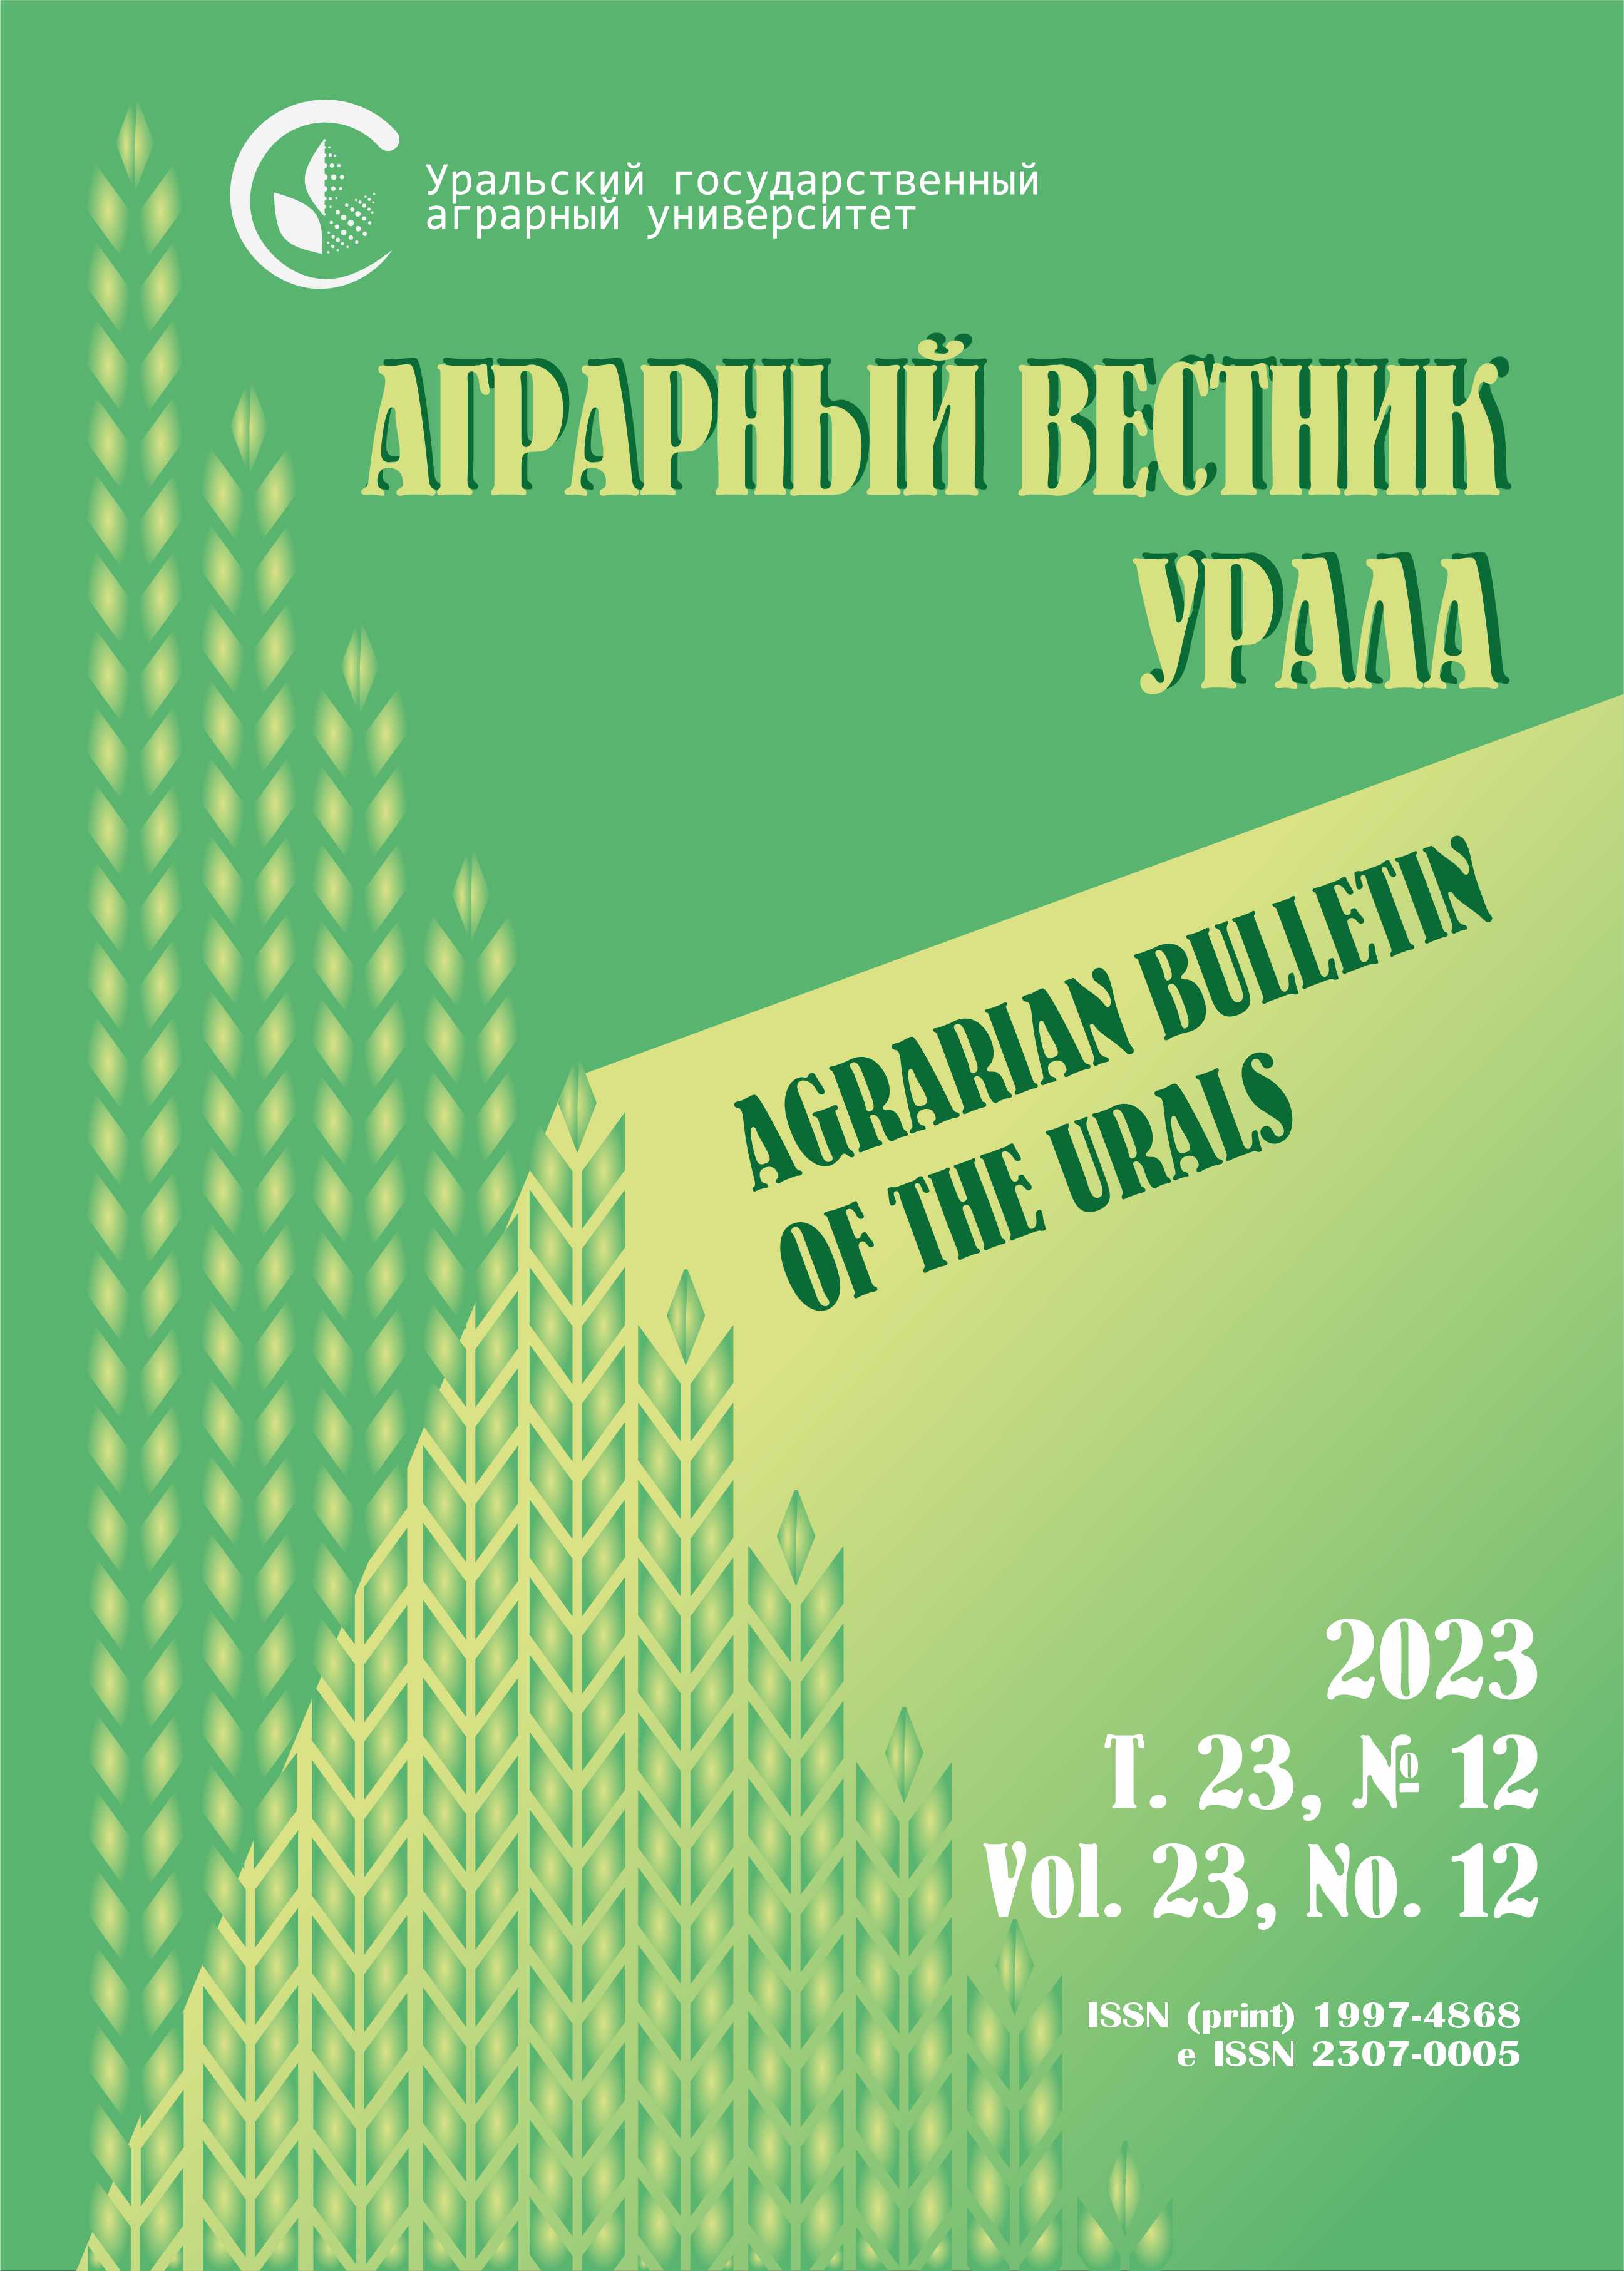                         Legislative bases for regulation of the development of organic agriculture  in Russia
            